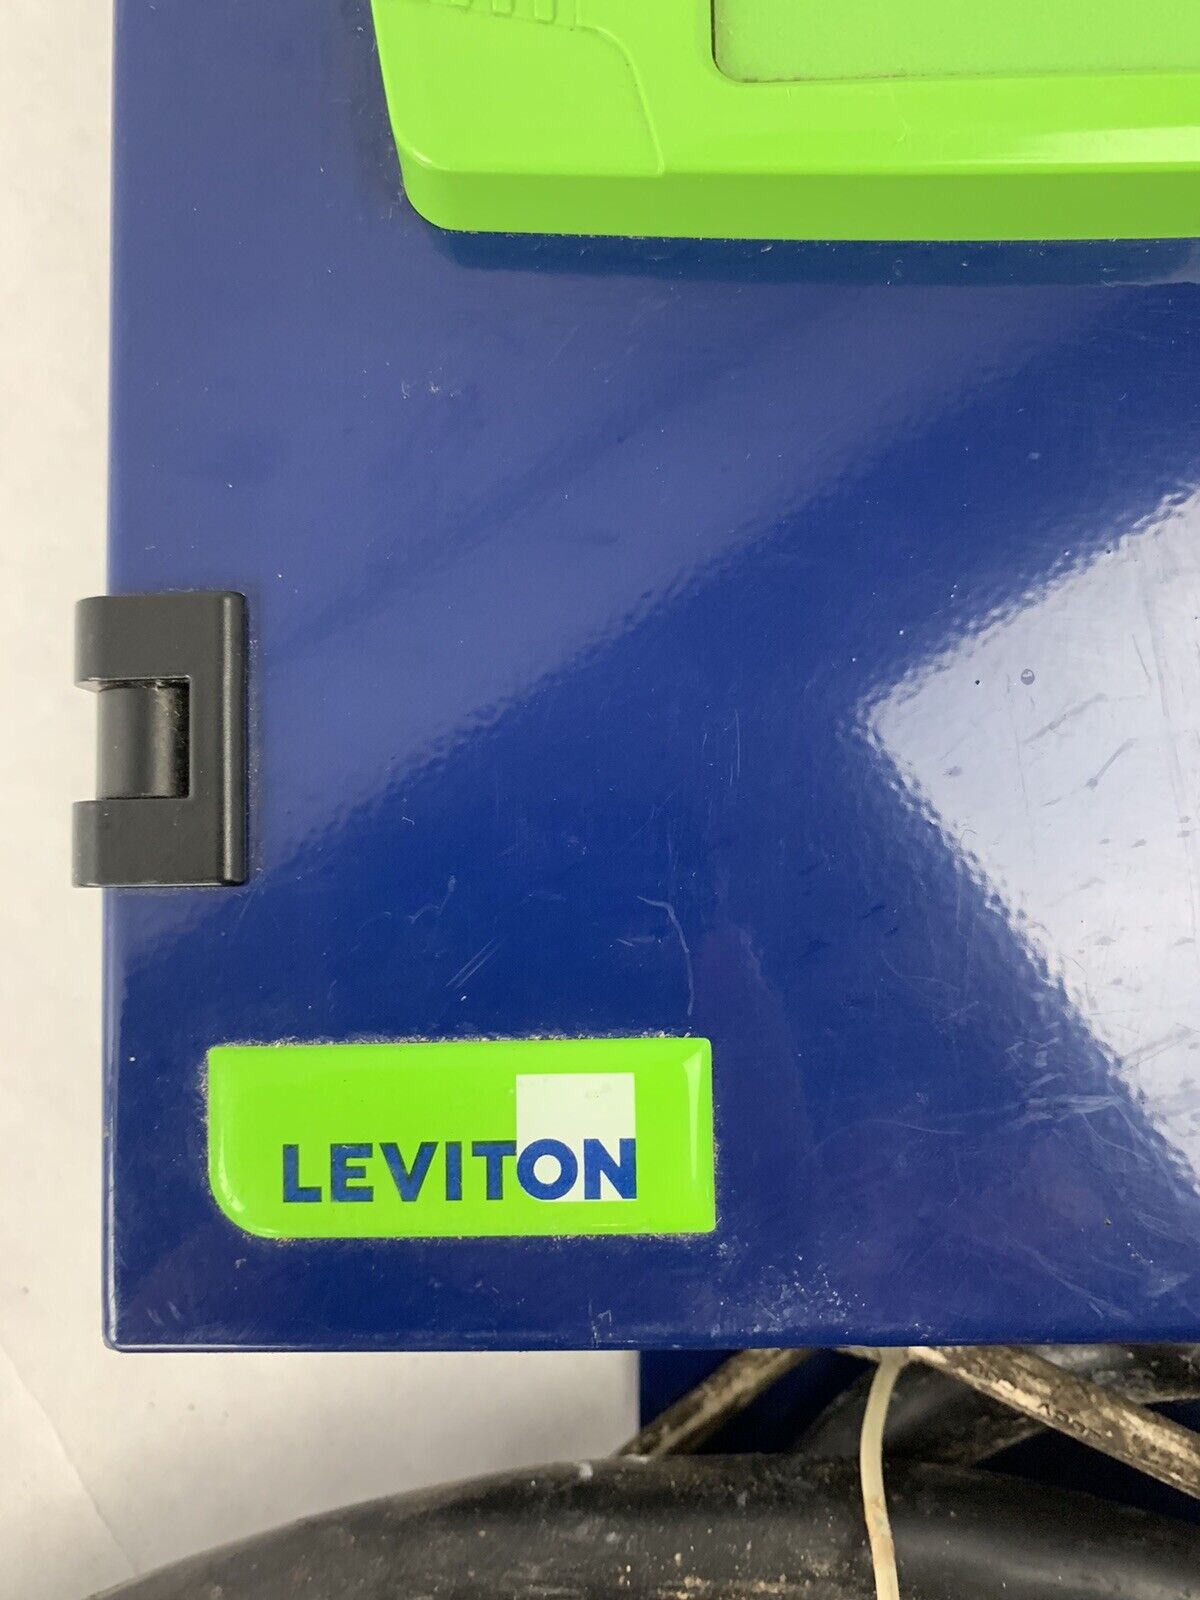 Leviton 001-EVB26-3PM  Home Charging Station with J1772 adapter